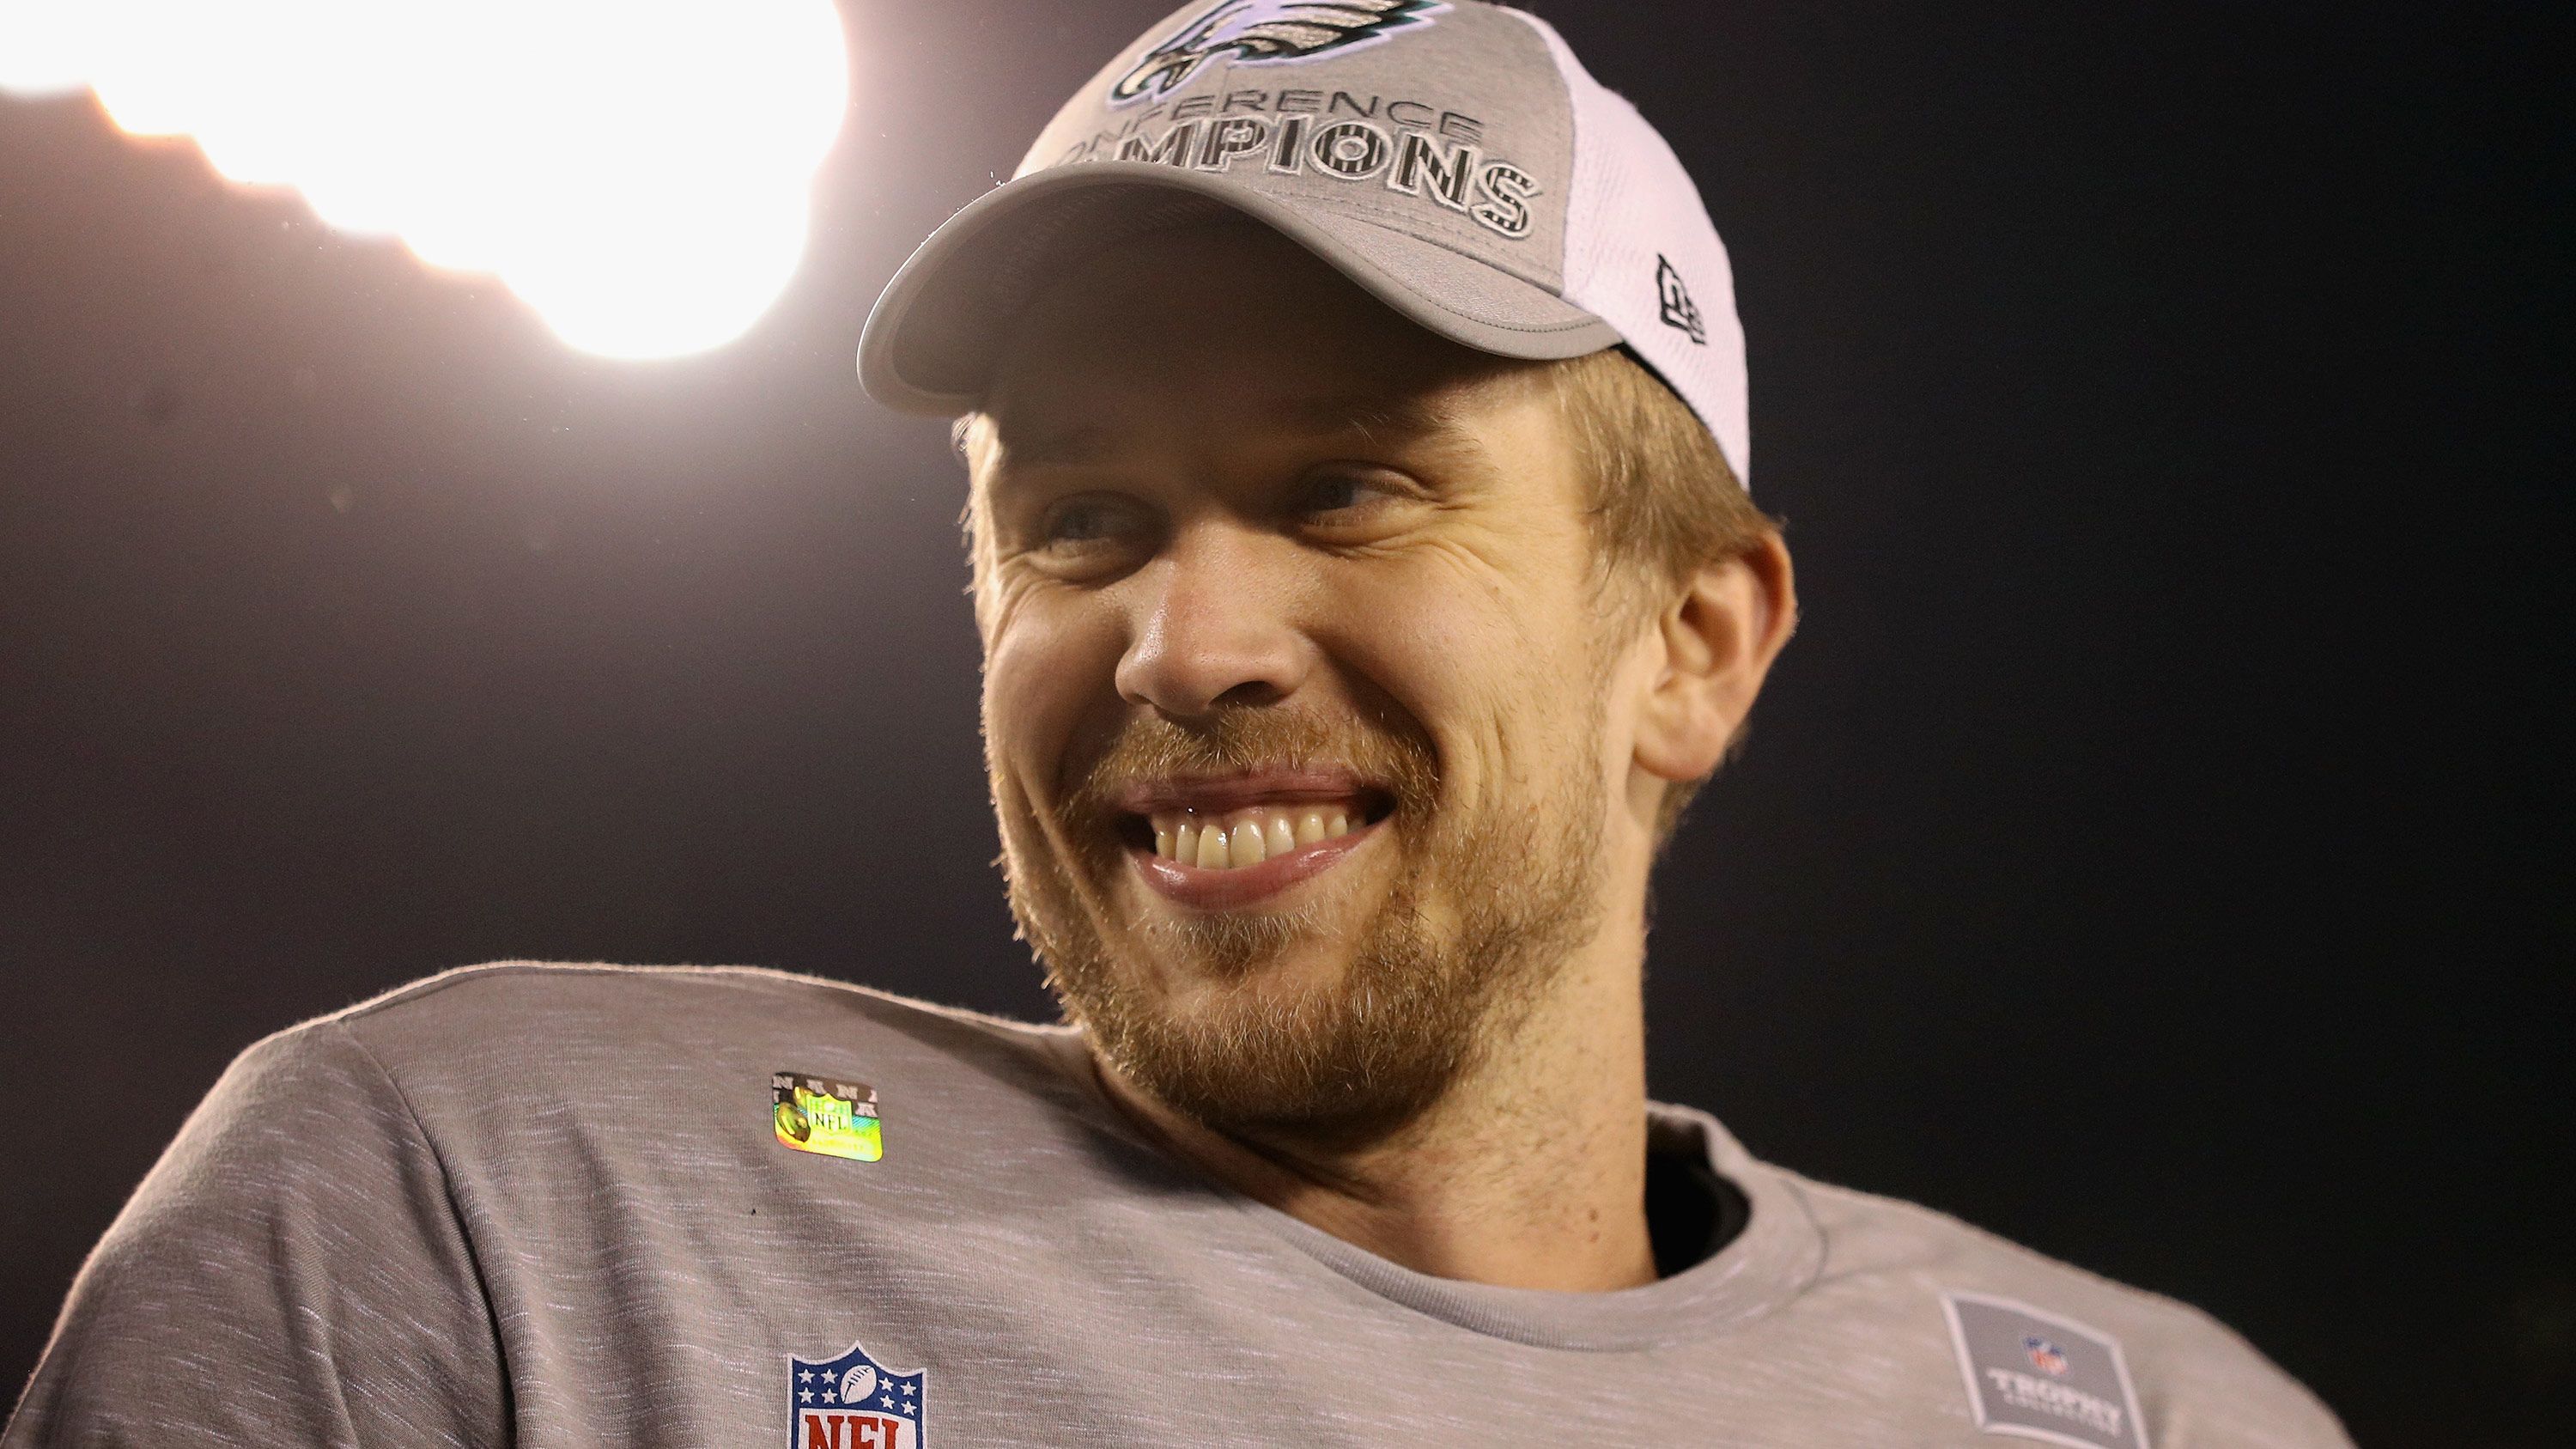 Nick Foles: From mulling retirement to Super Bowl LII QB